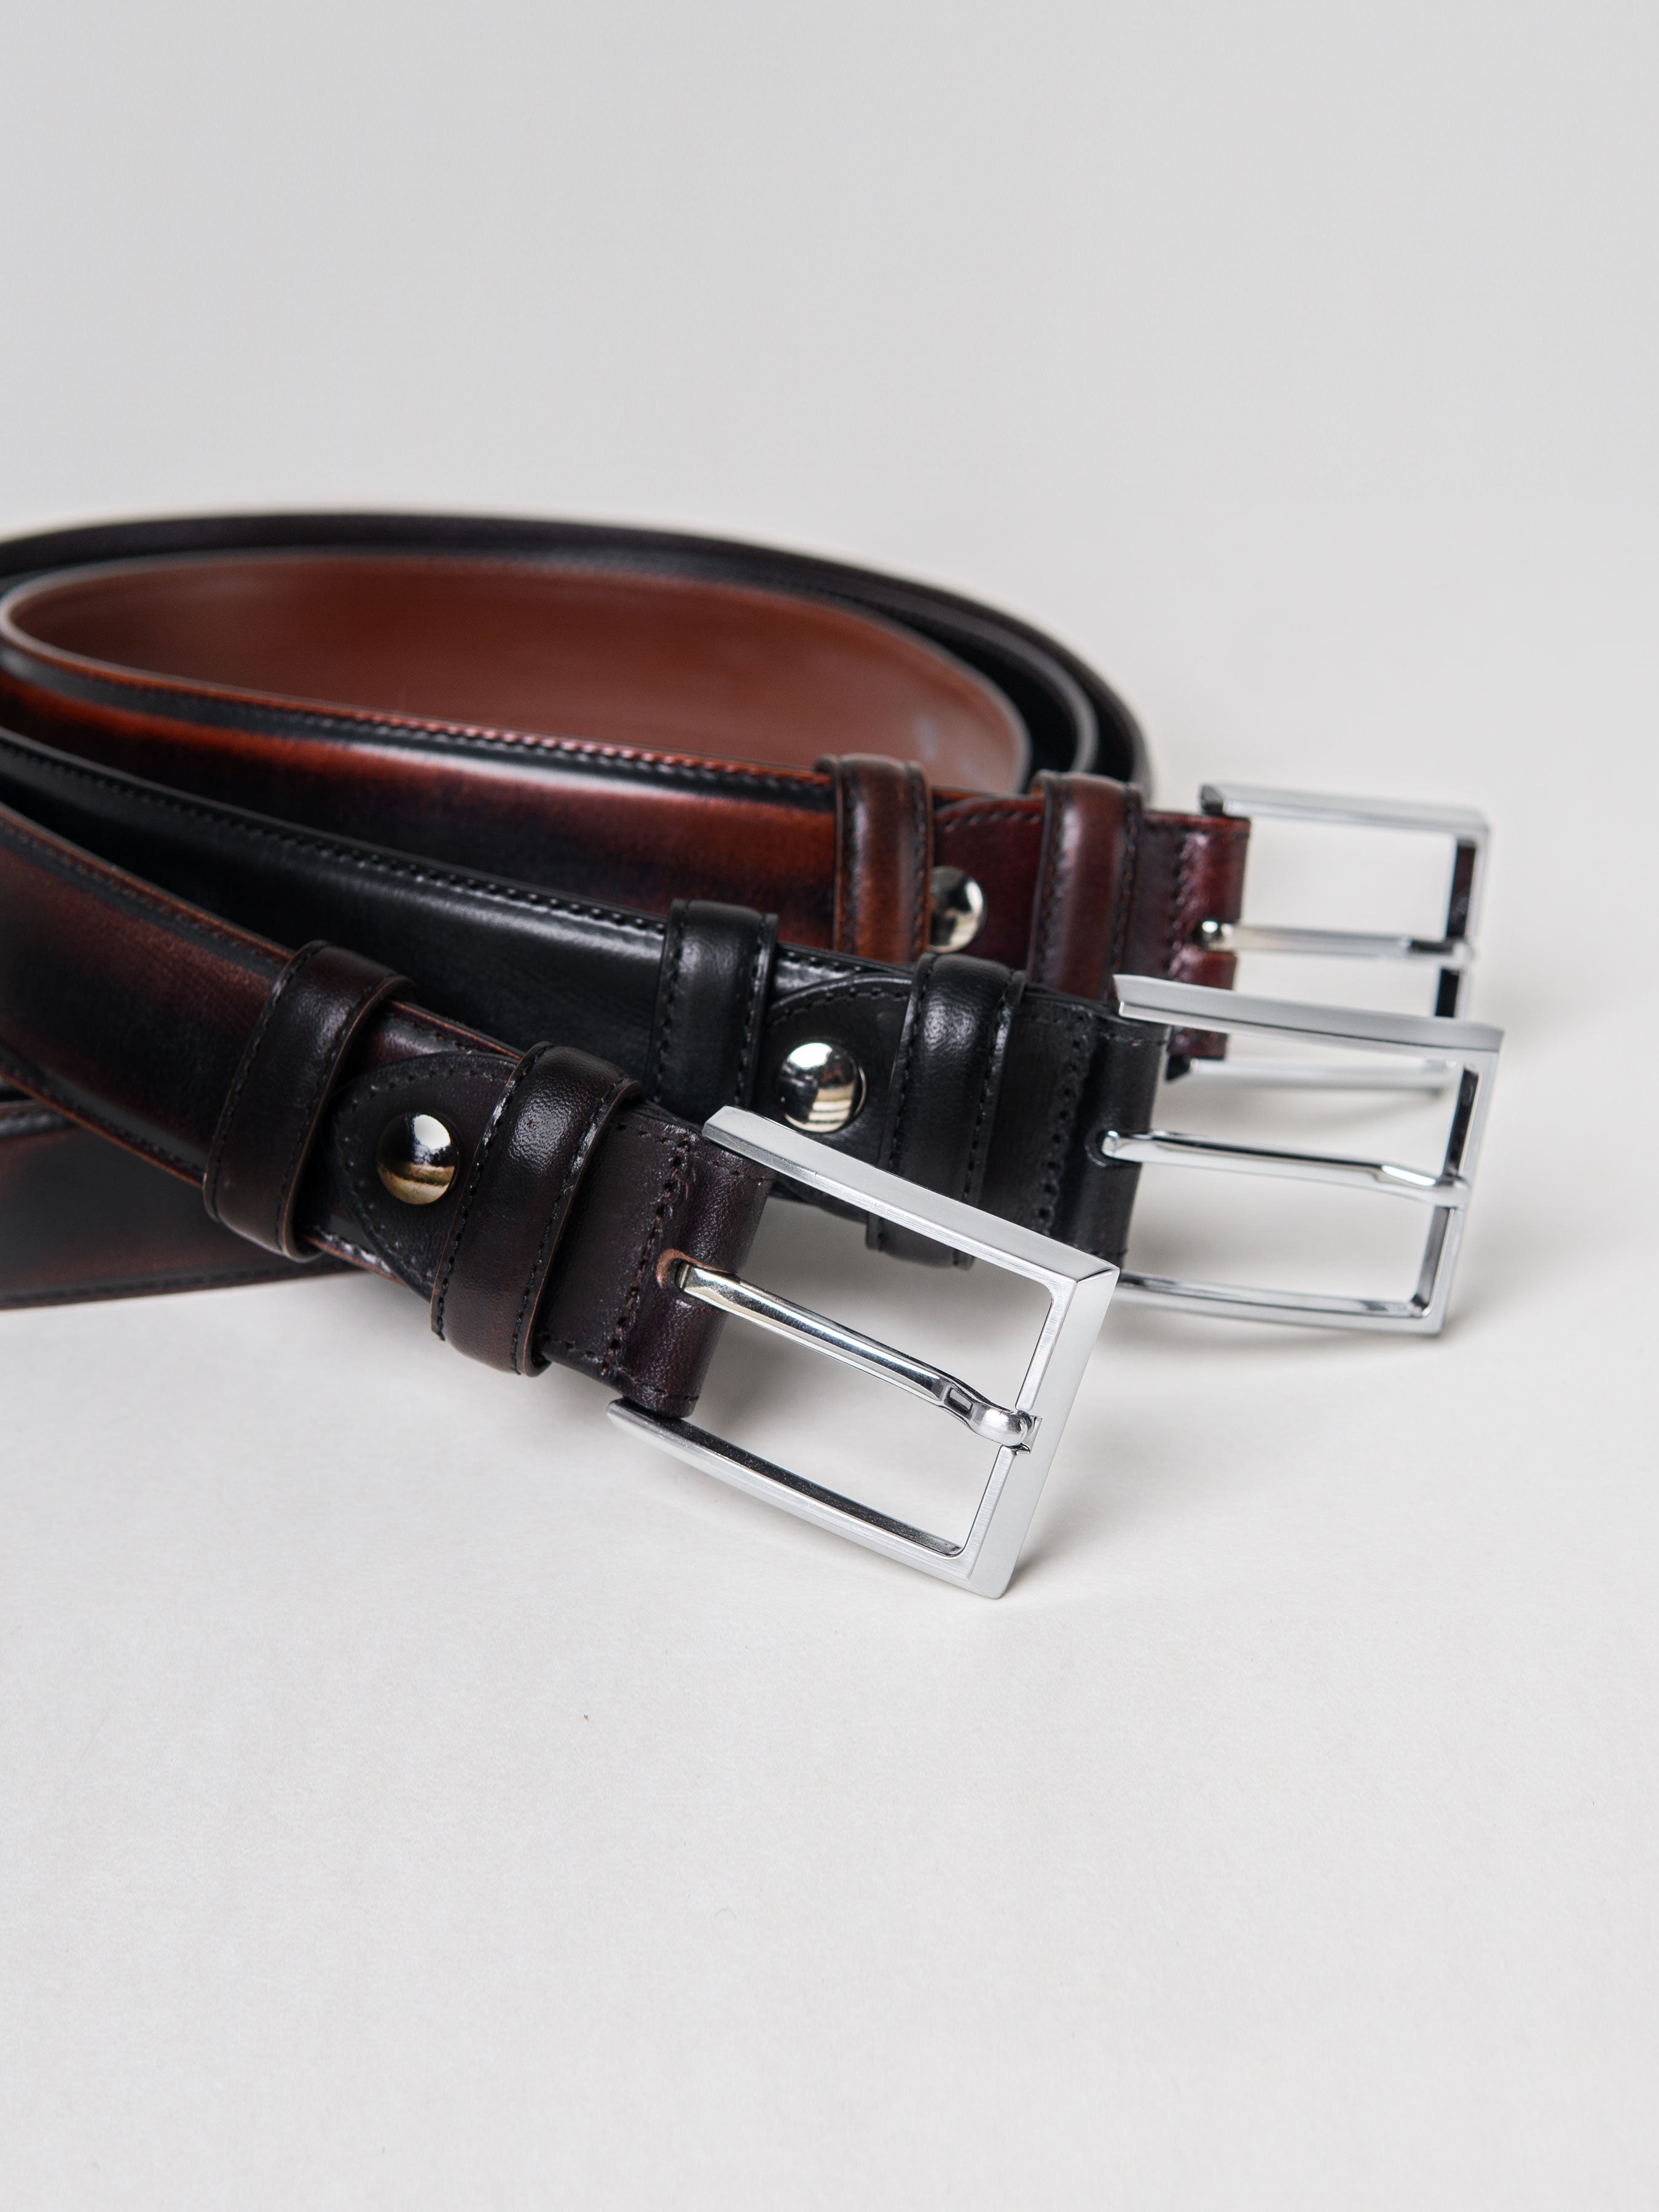 Polished Leather Belt with Silver-toned Buckle - Zeve Shoes